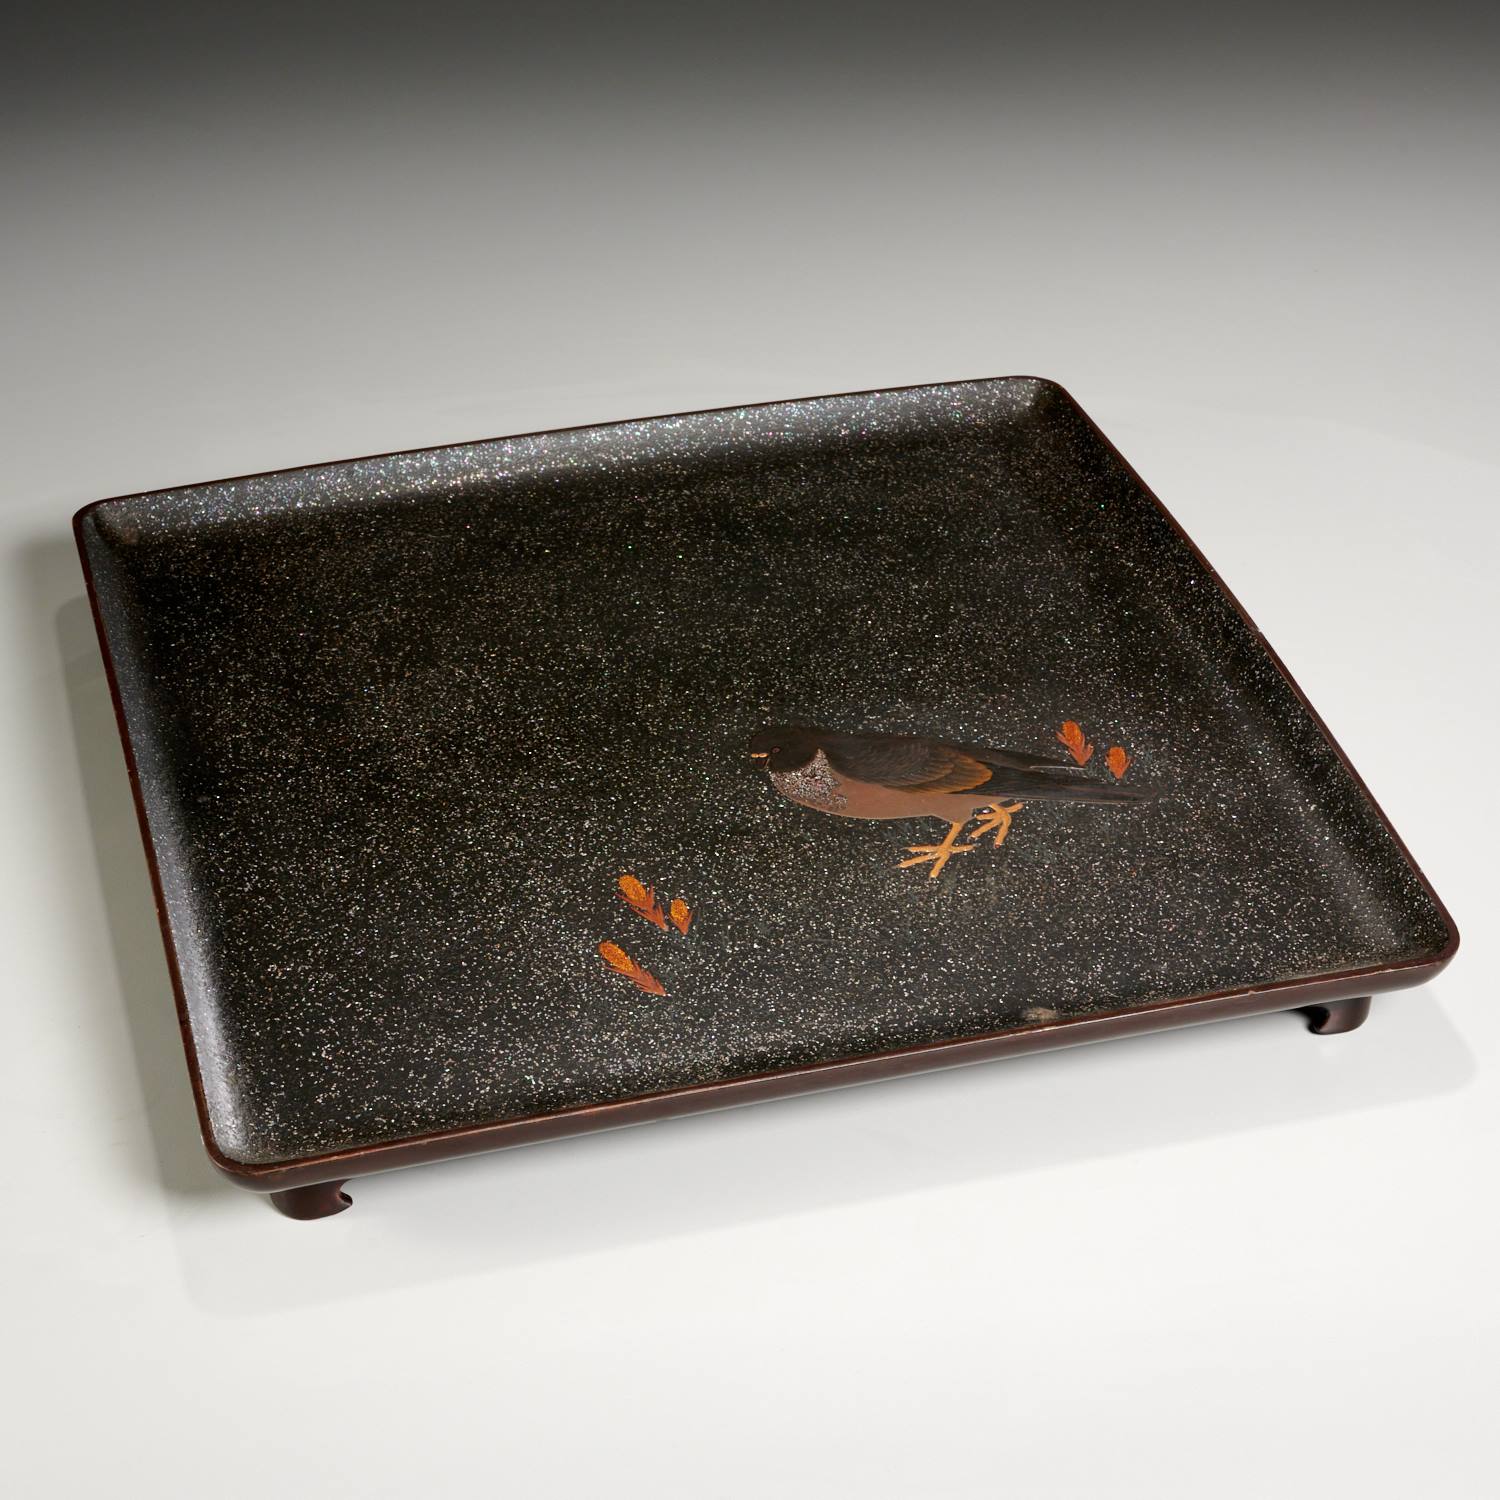 NICE JAPANESE LACQUERED TRAY Likely